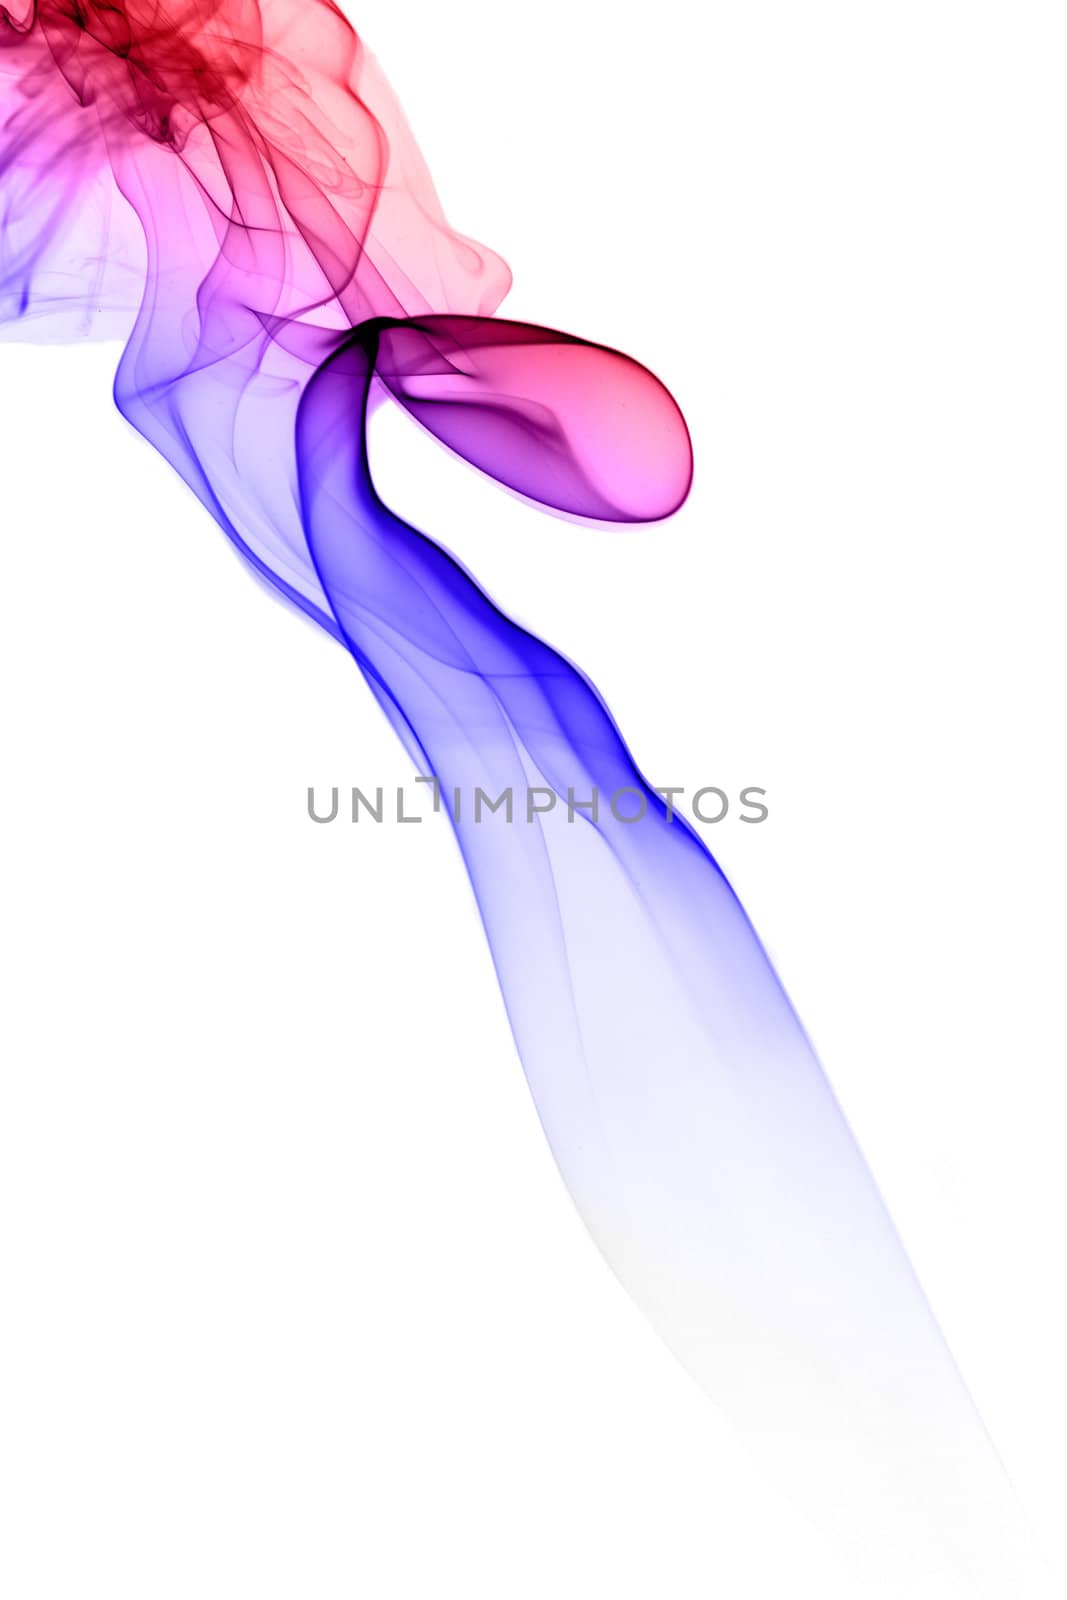 Colored smoke isolated on white